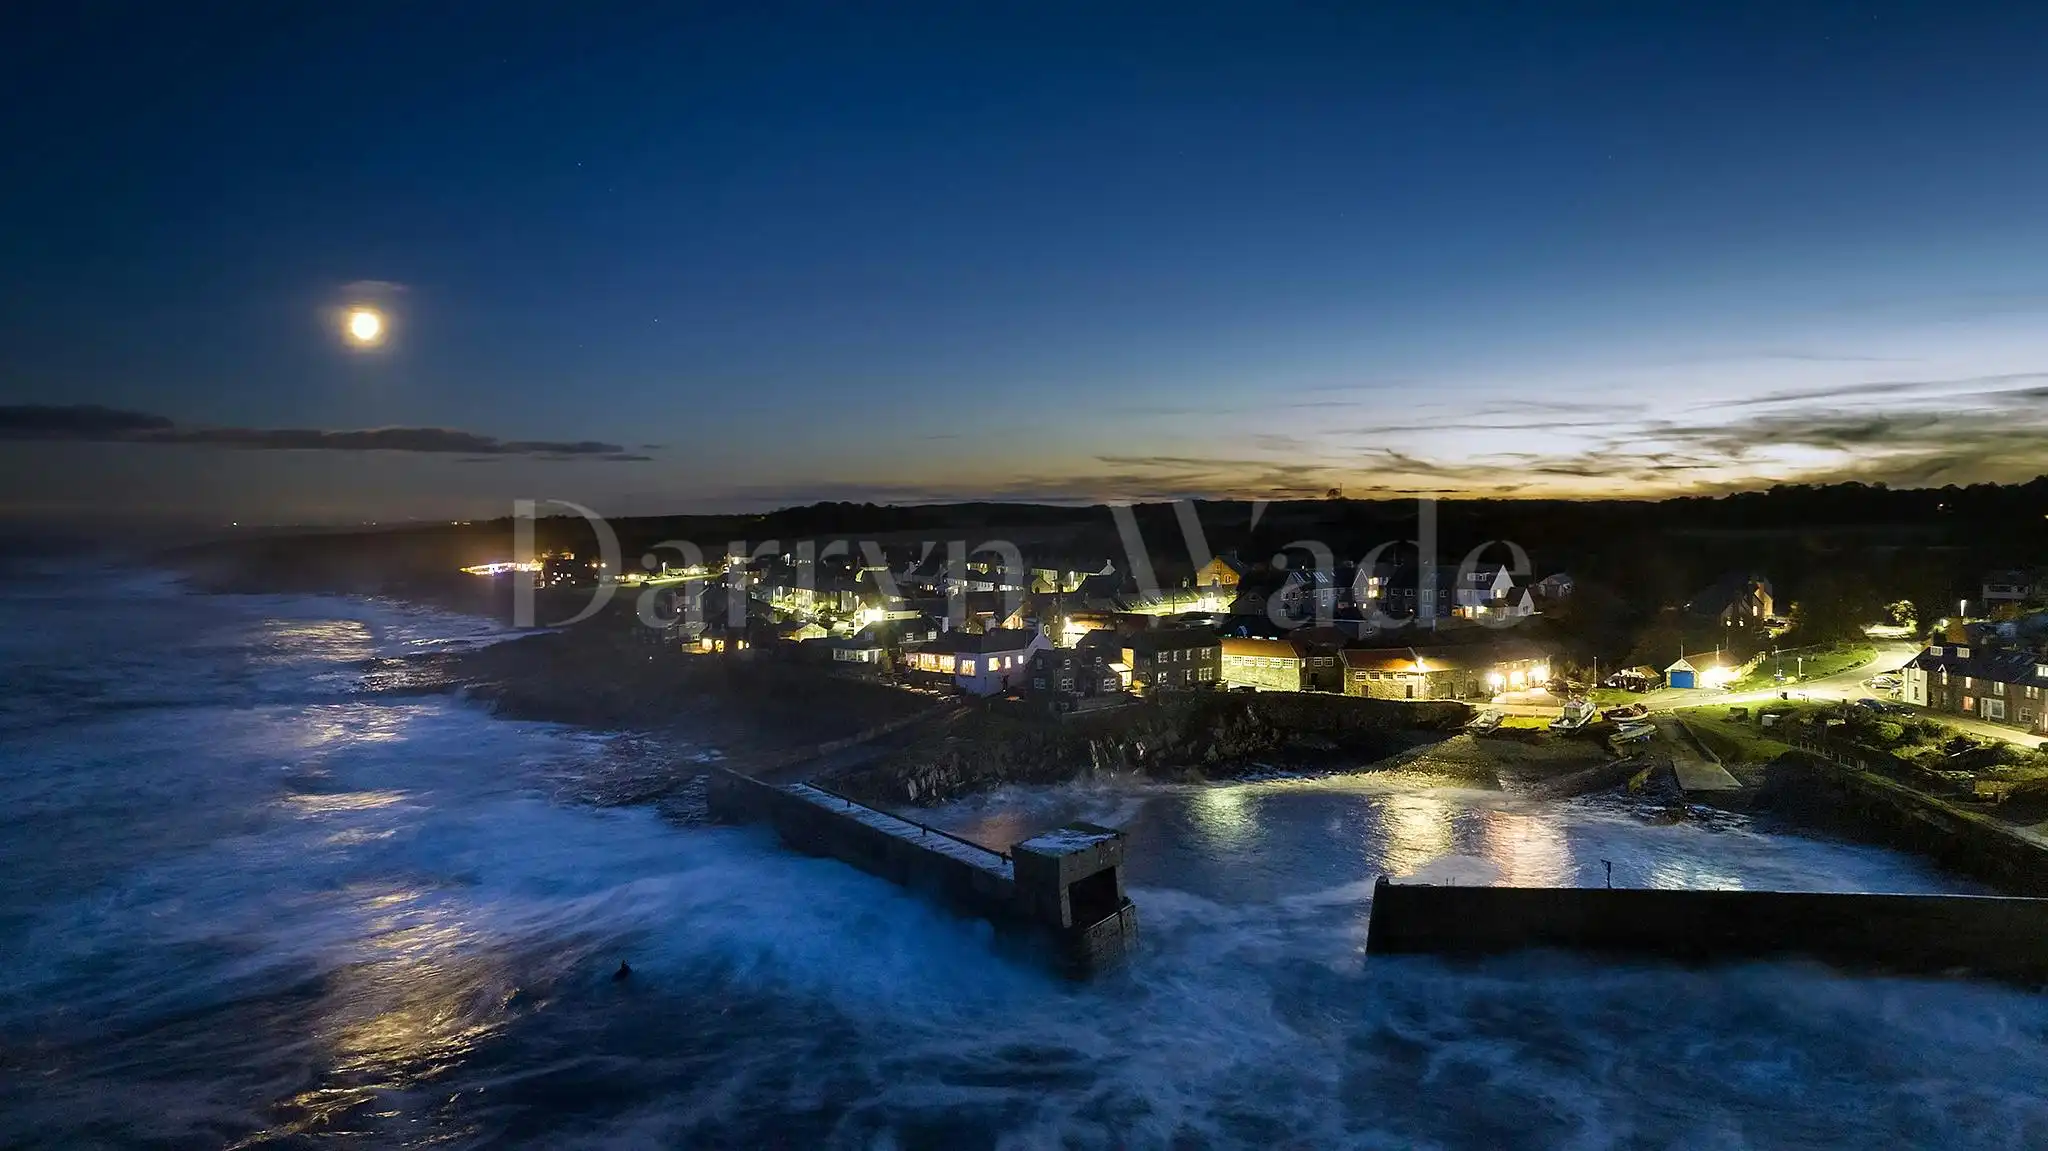 A stormy night over Craster